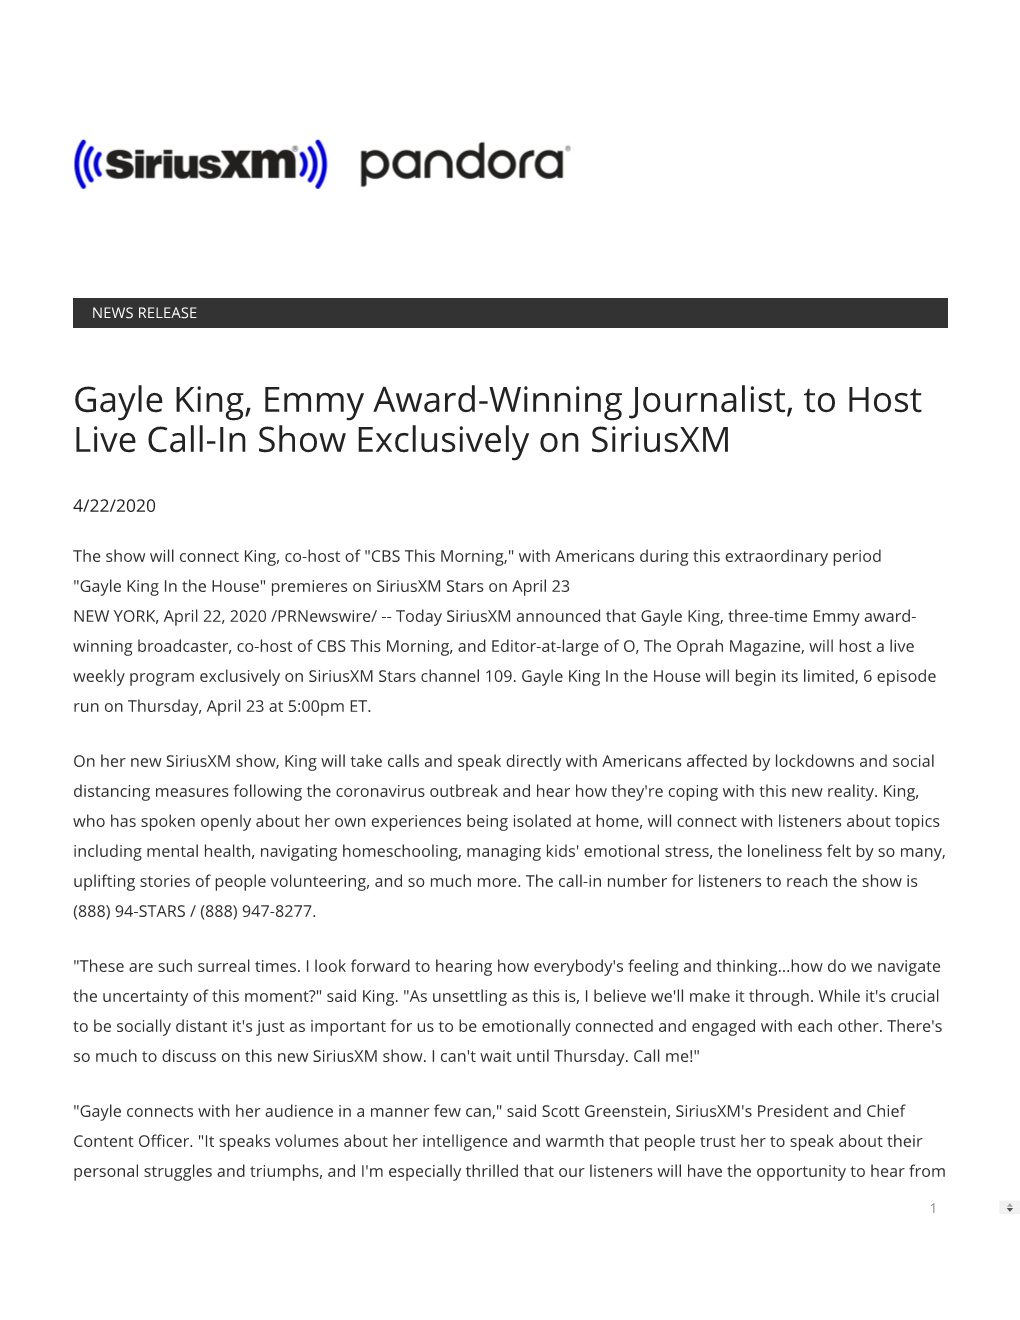 Gayle King, Emmy Award-Winning Journalist, to Host Live Call-In Show Exclusively on Siriusxm